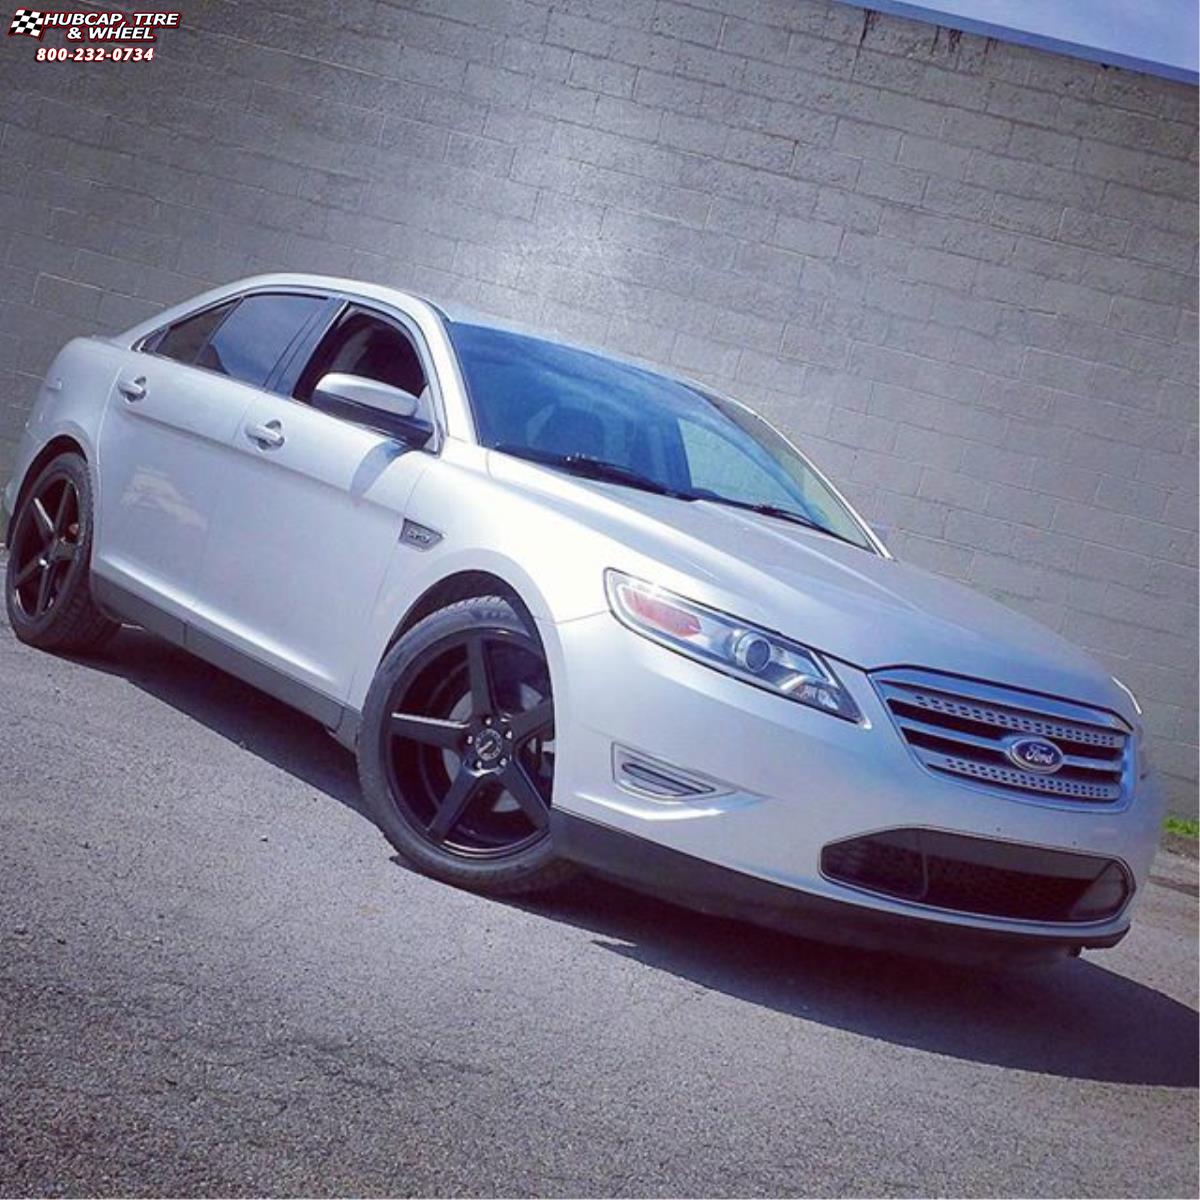 vehicle gallery/ford taurus xd series km685 district  Satin Black wheels and rims